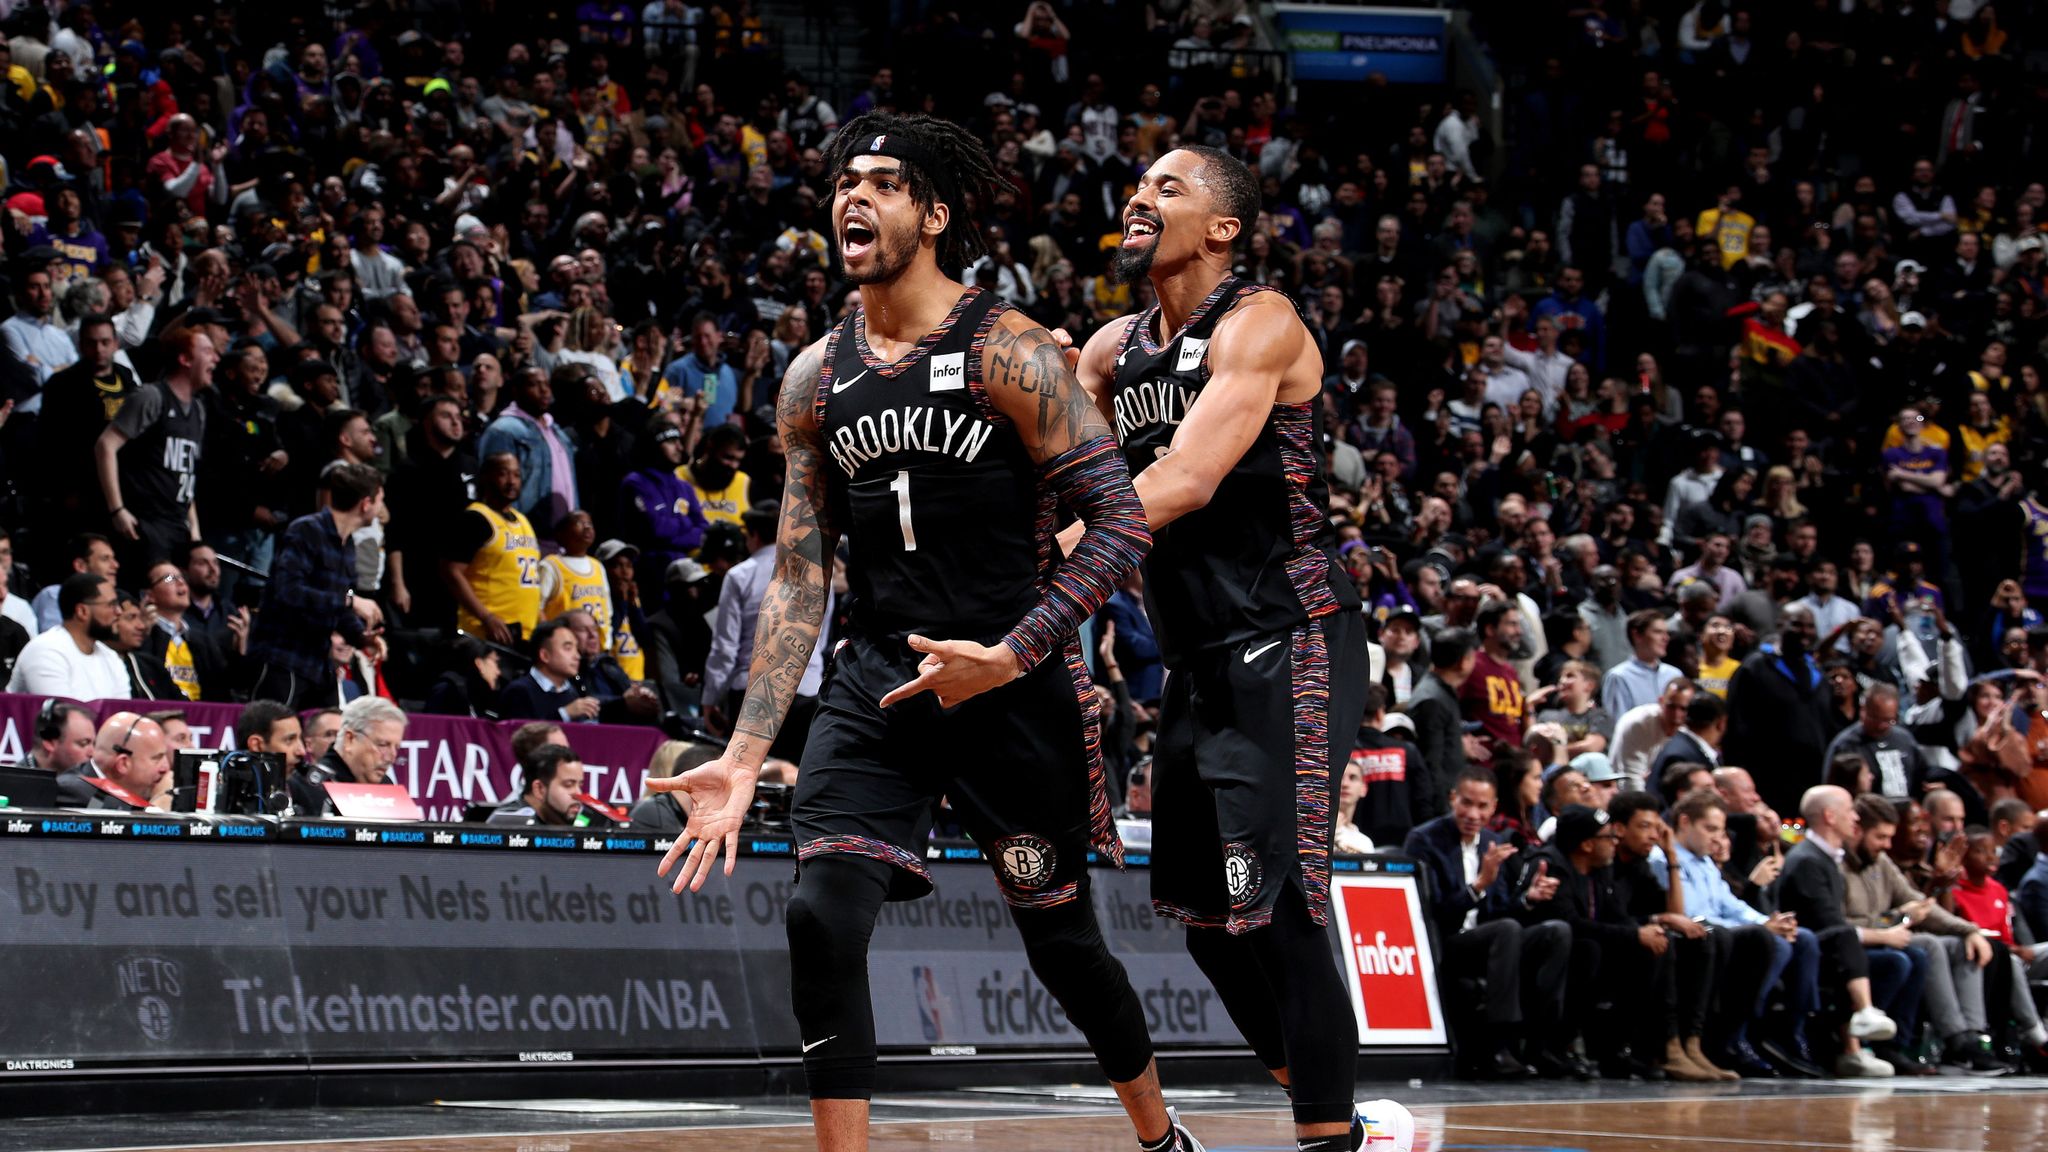 D'Angelo Russell, Nets Bench Dance During Blowout Win vs